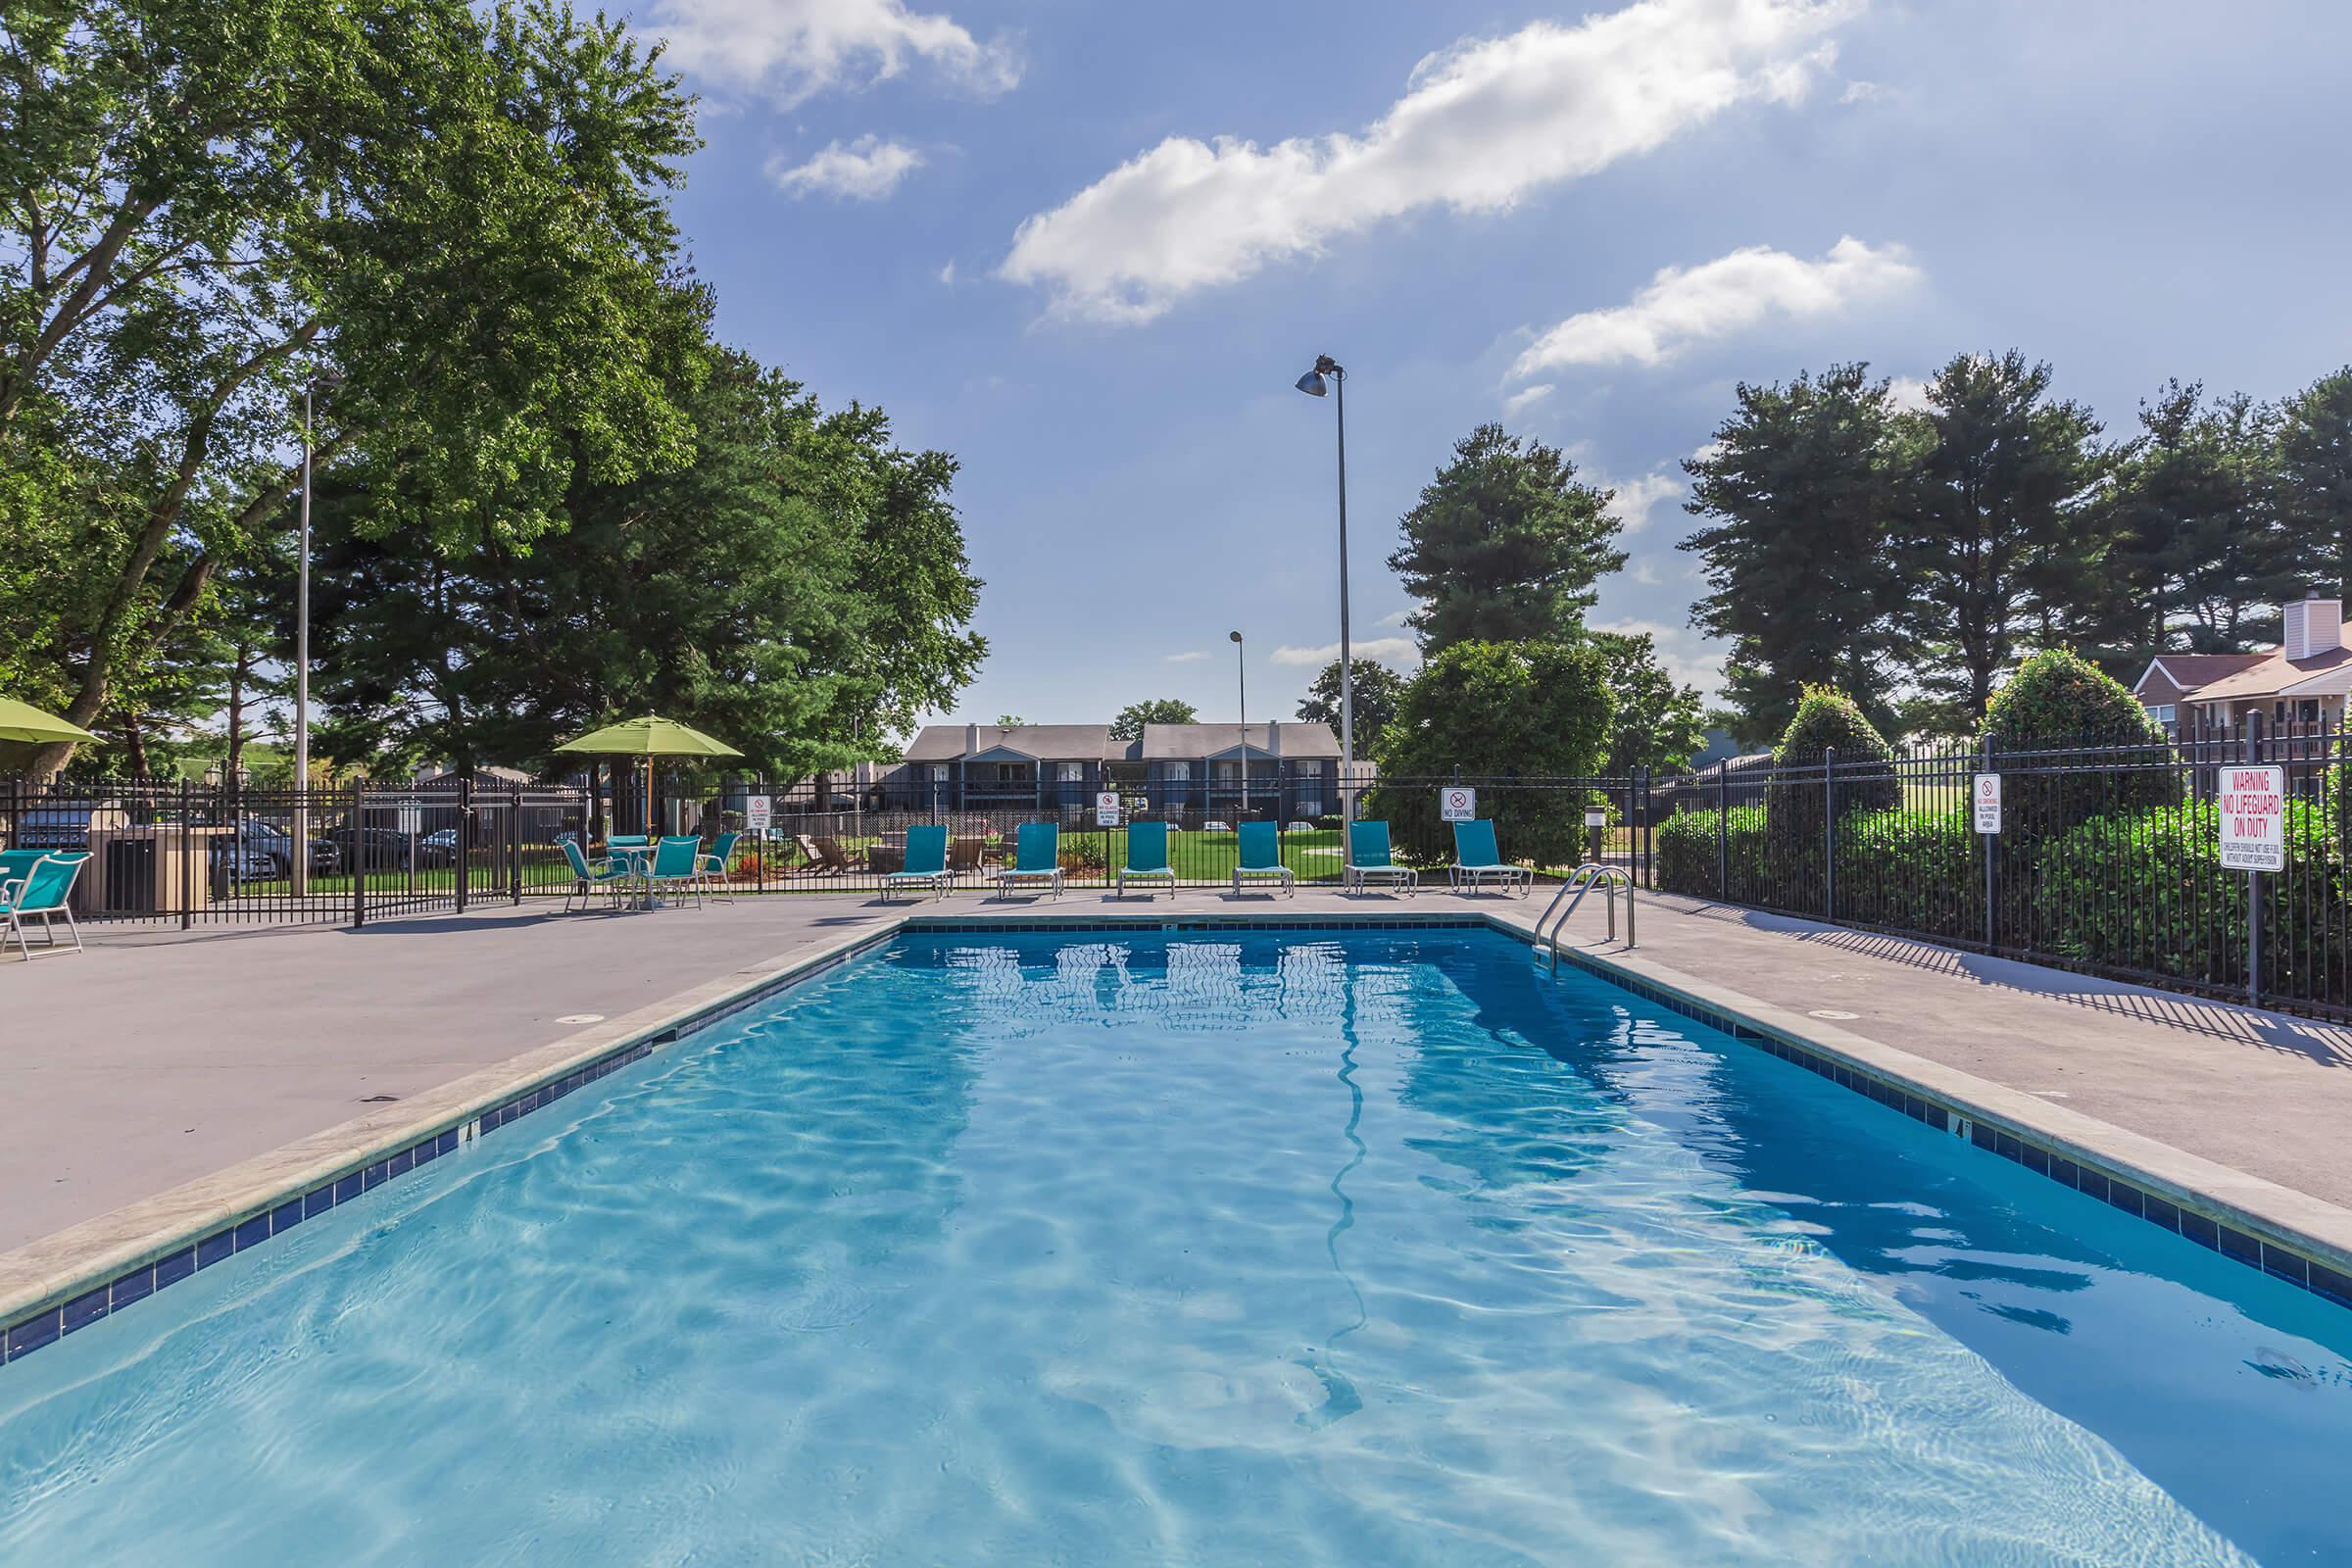 Enjoy The Swimming Pool at Sussex Downs in Franklin, TN